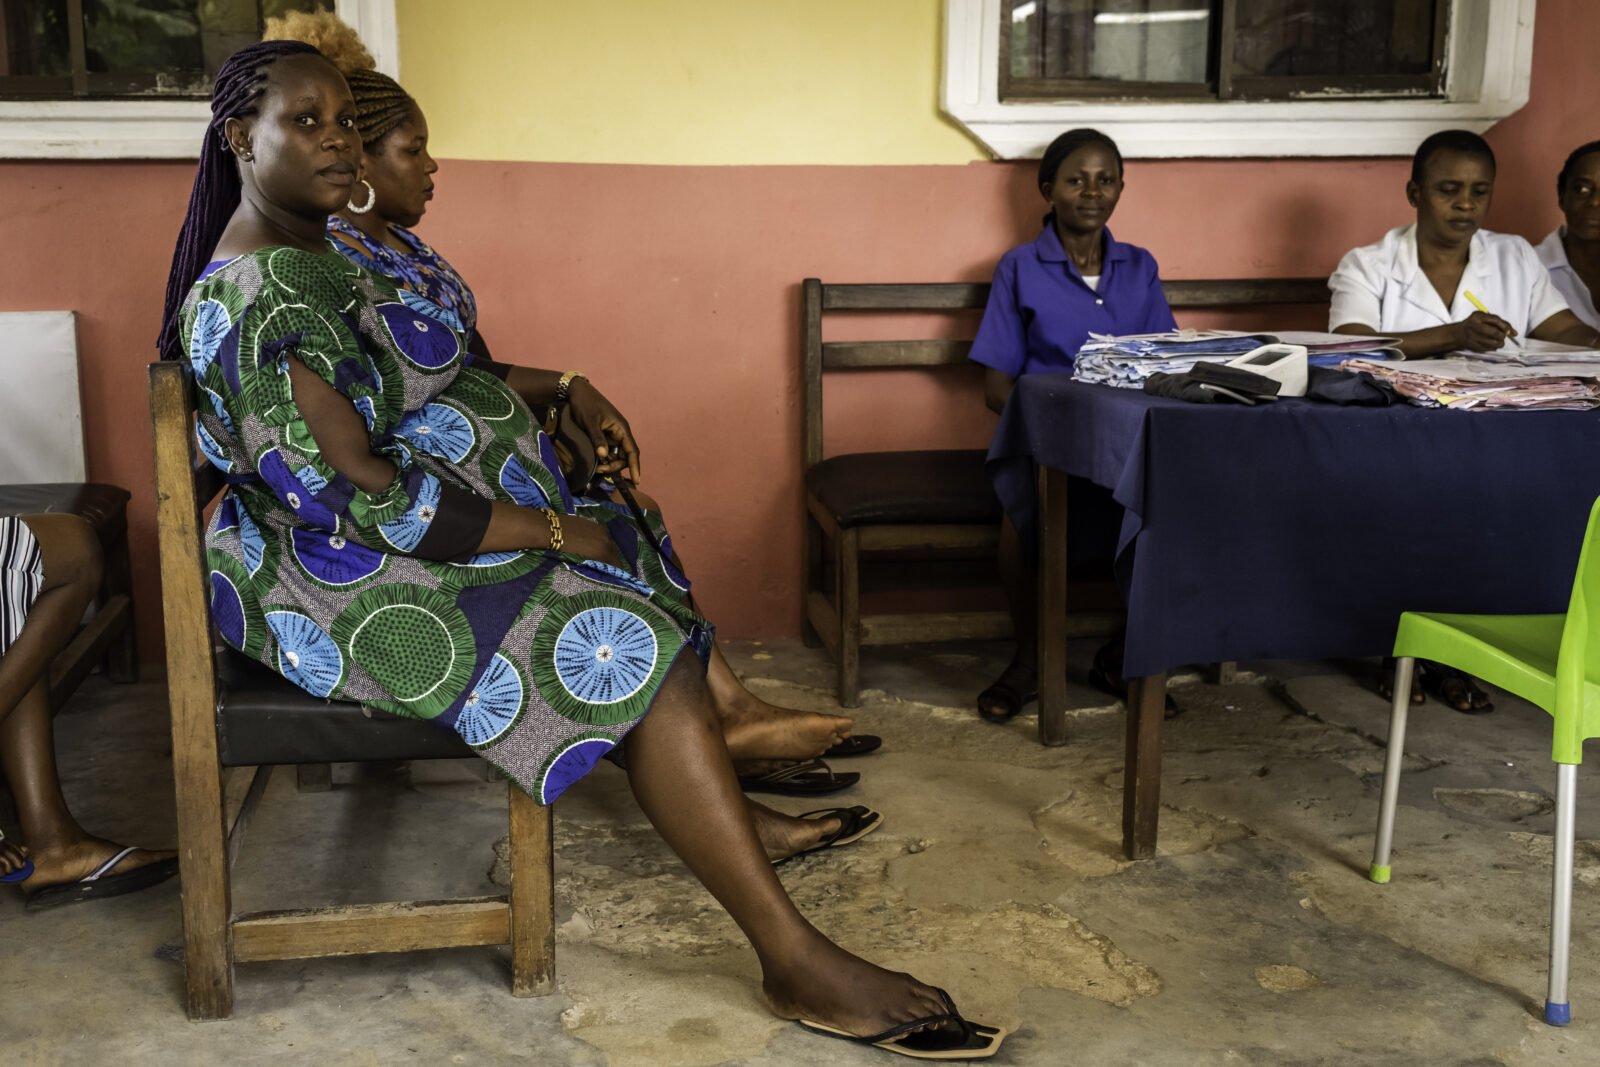 Abasiama sits in the queue with other expectant mothers as they wait to be attended to by the nurses in the Primary Health Centre Base, Uyo Akwa Ibom State, Nigeria